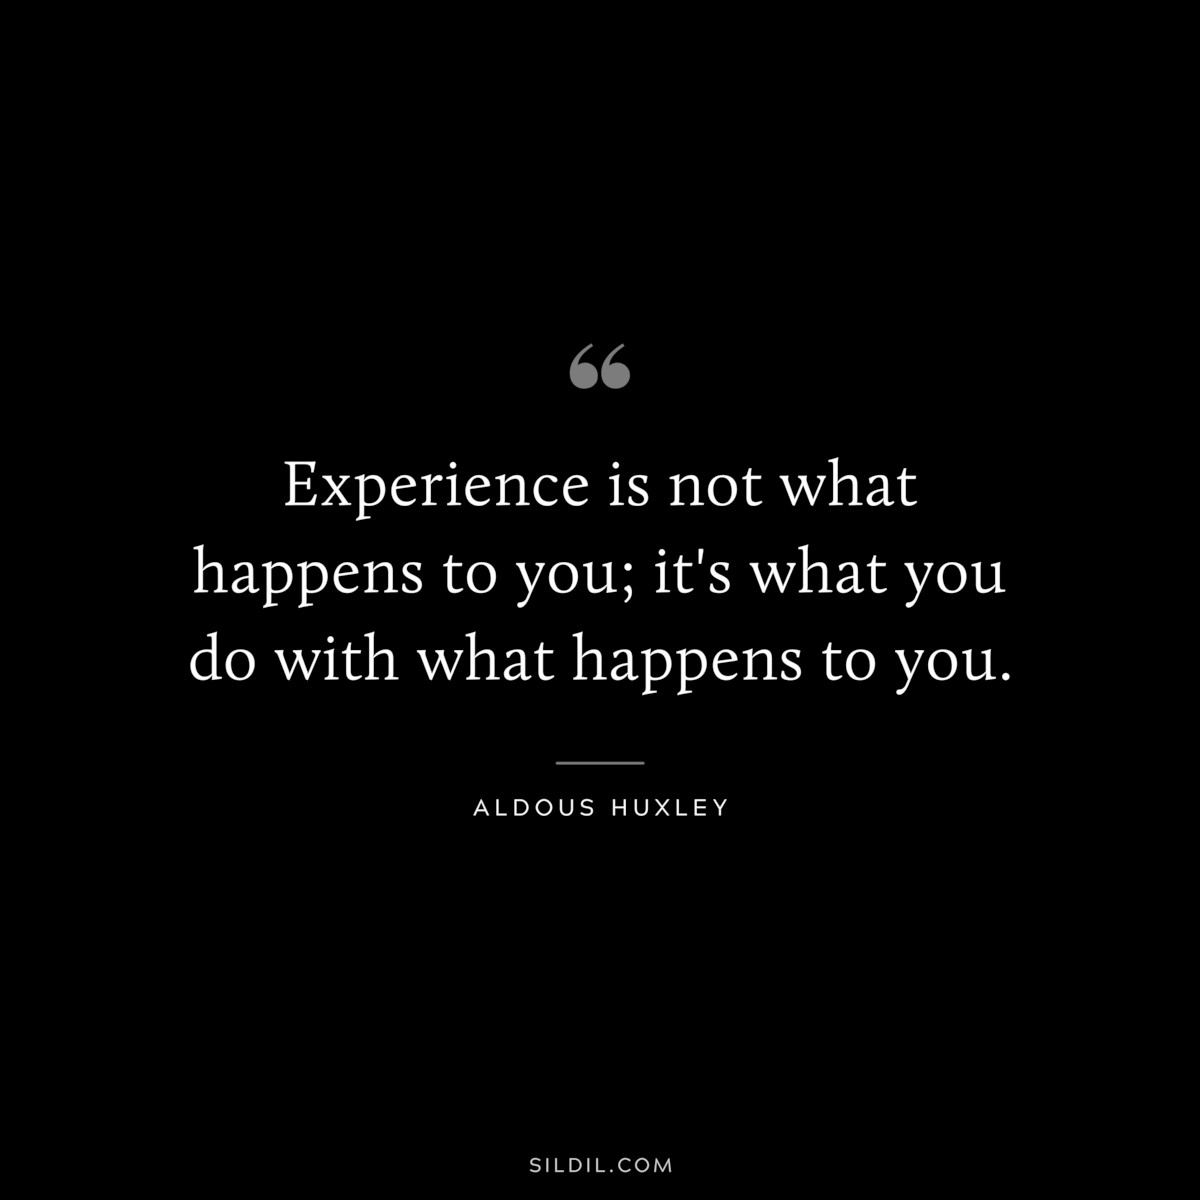 Experience is not what happens to you; it's what you do with what happens to you. ― Aldous Huxley